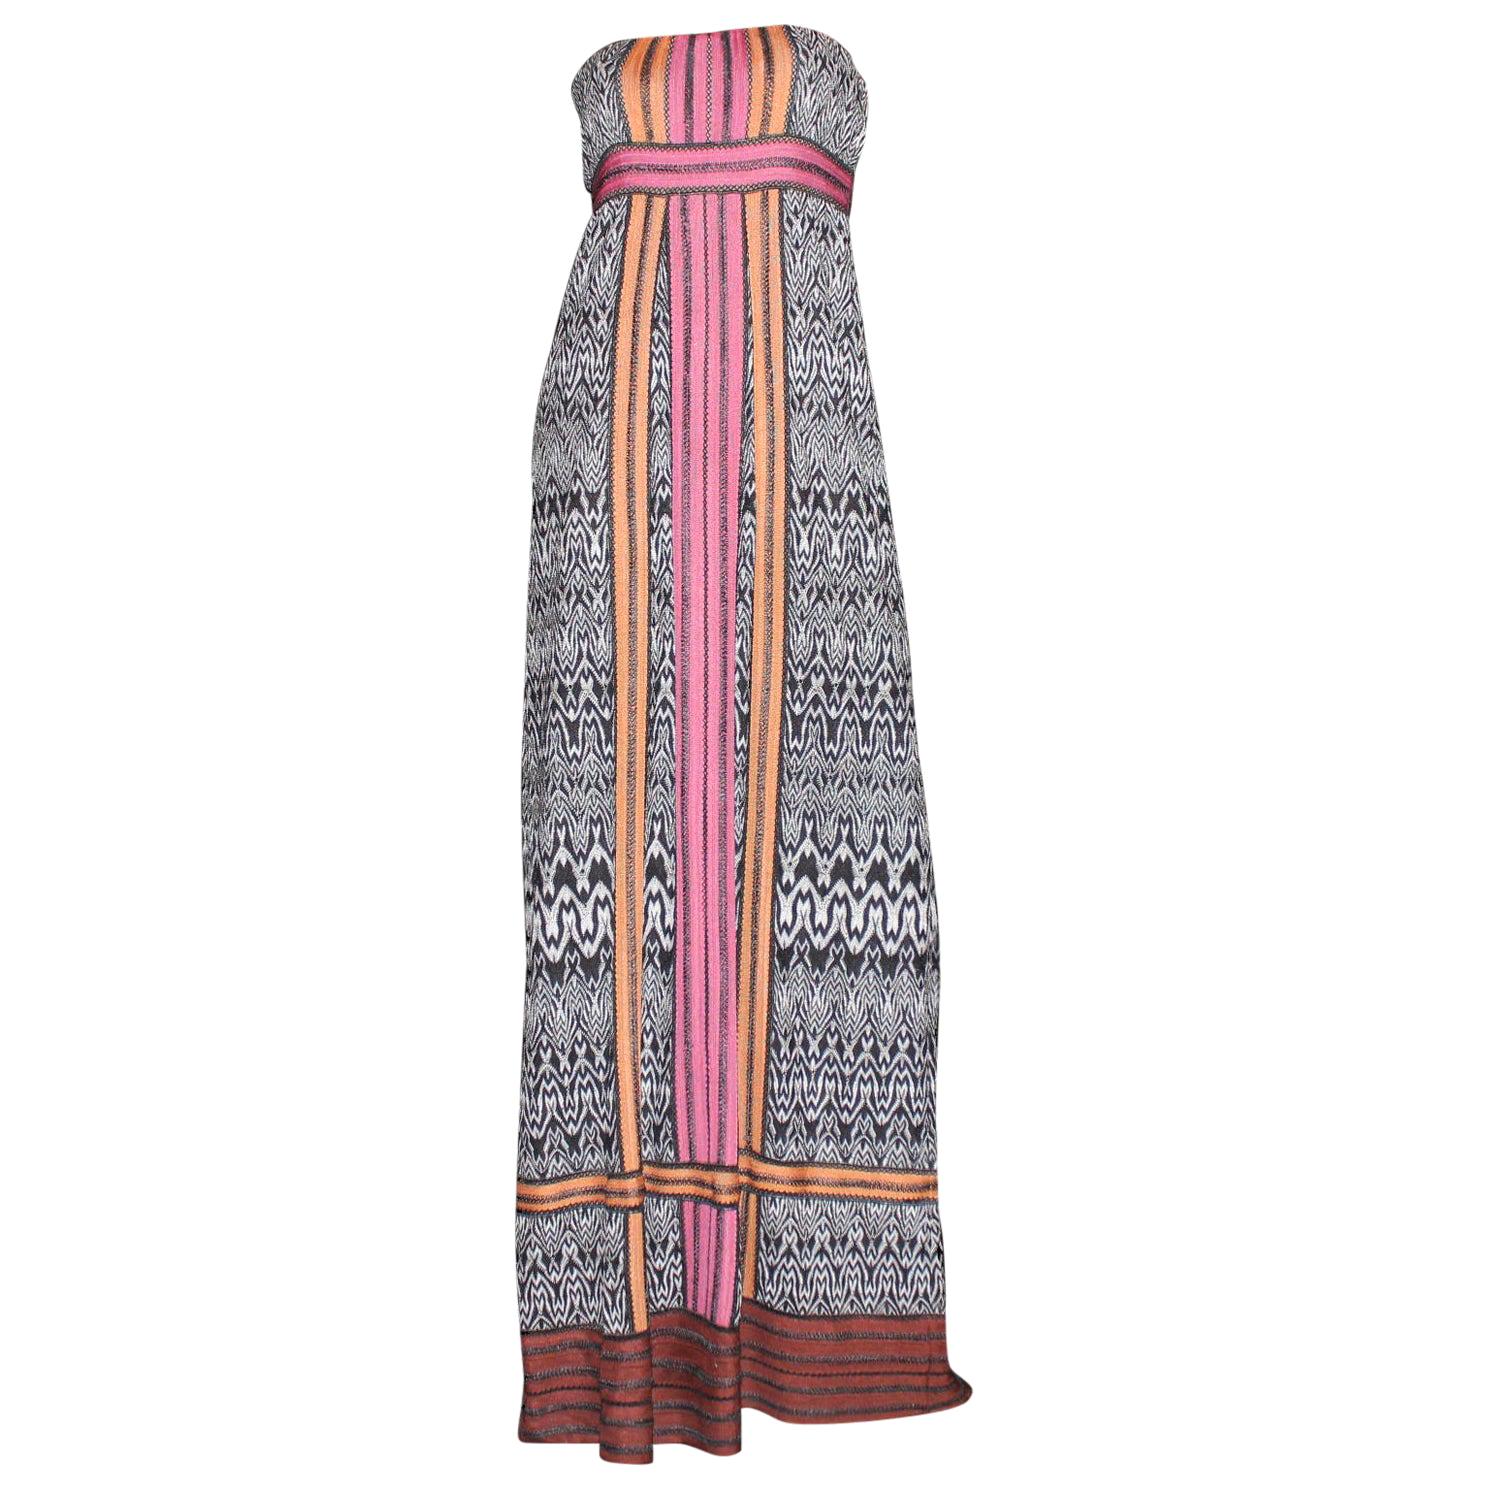 NEW Missoni Monochrome Crochet Knit Maxi Dress Gown with Colorblock Trimming